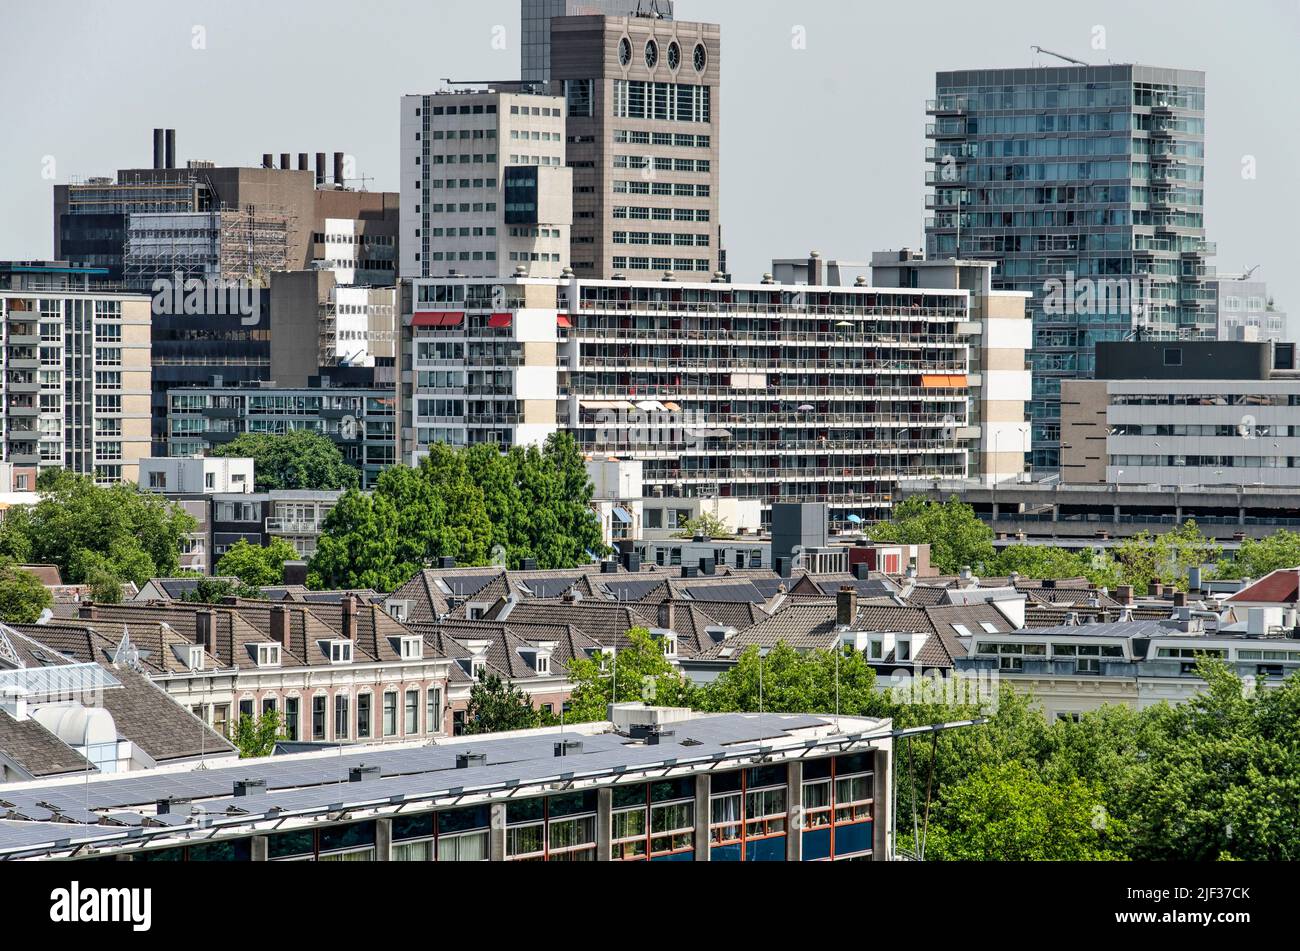 Rotterdam, The Netherlands, June 18, 2022: low aerial view of the modern post-war buildings in the city center Stock Photo